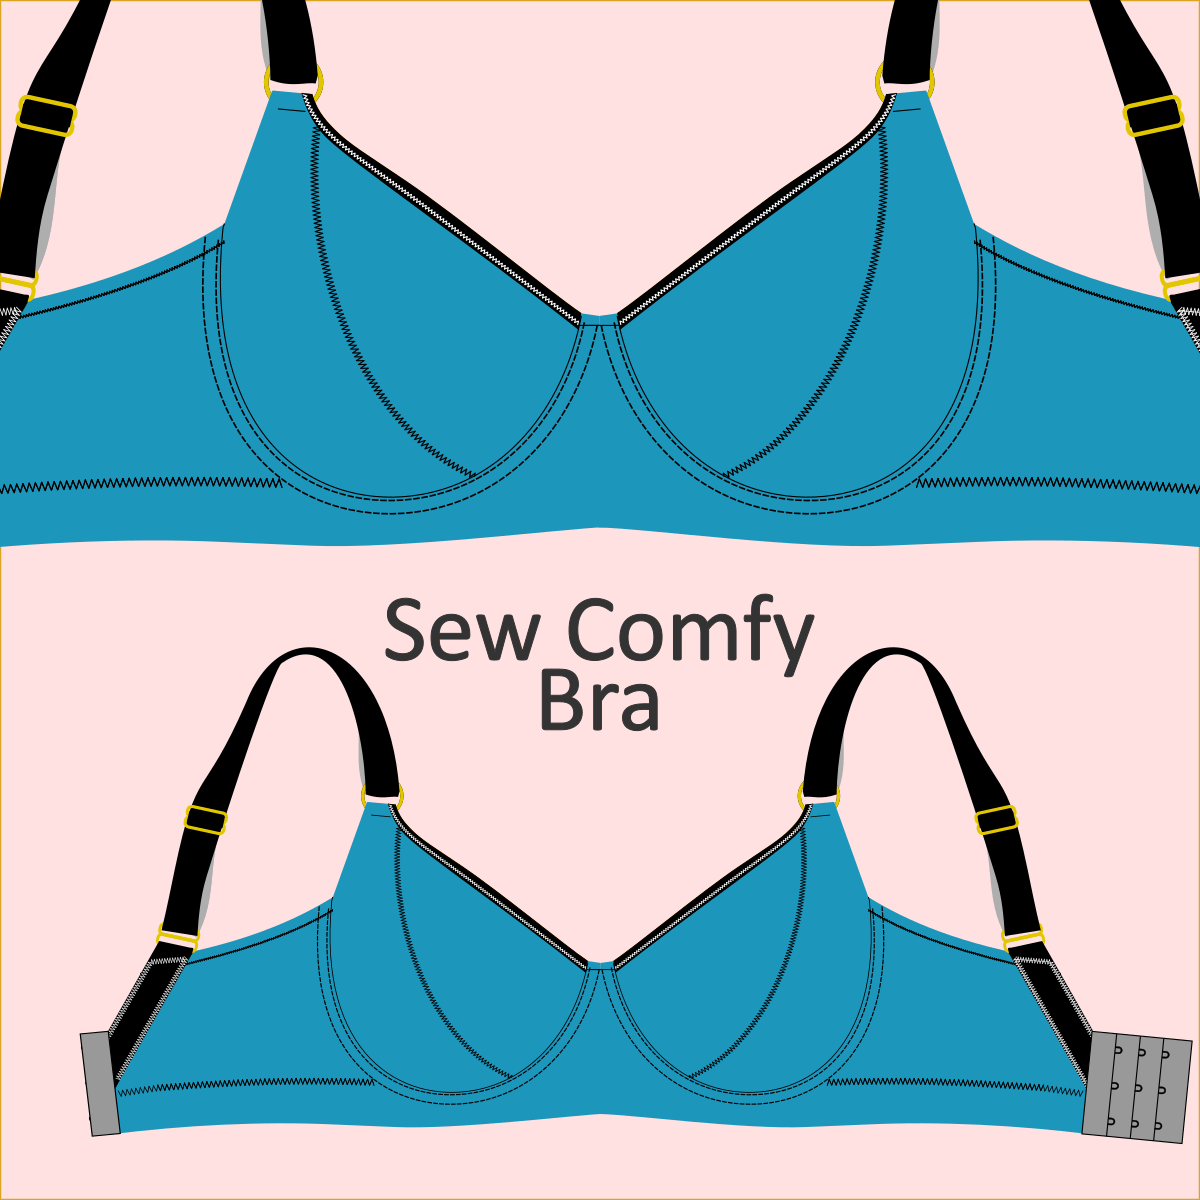 Sew Comfy Bra for the bra making enthusiasts from Make Bra